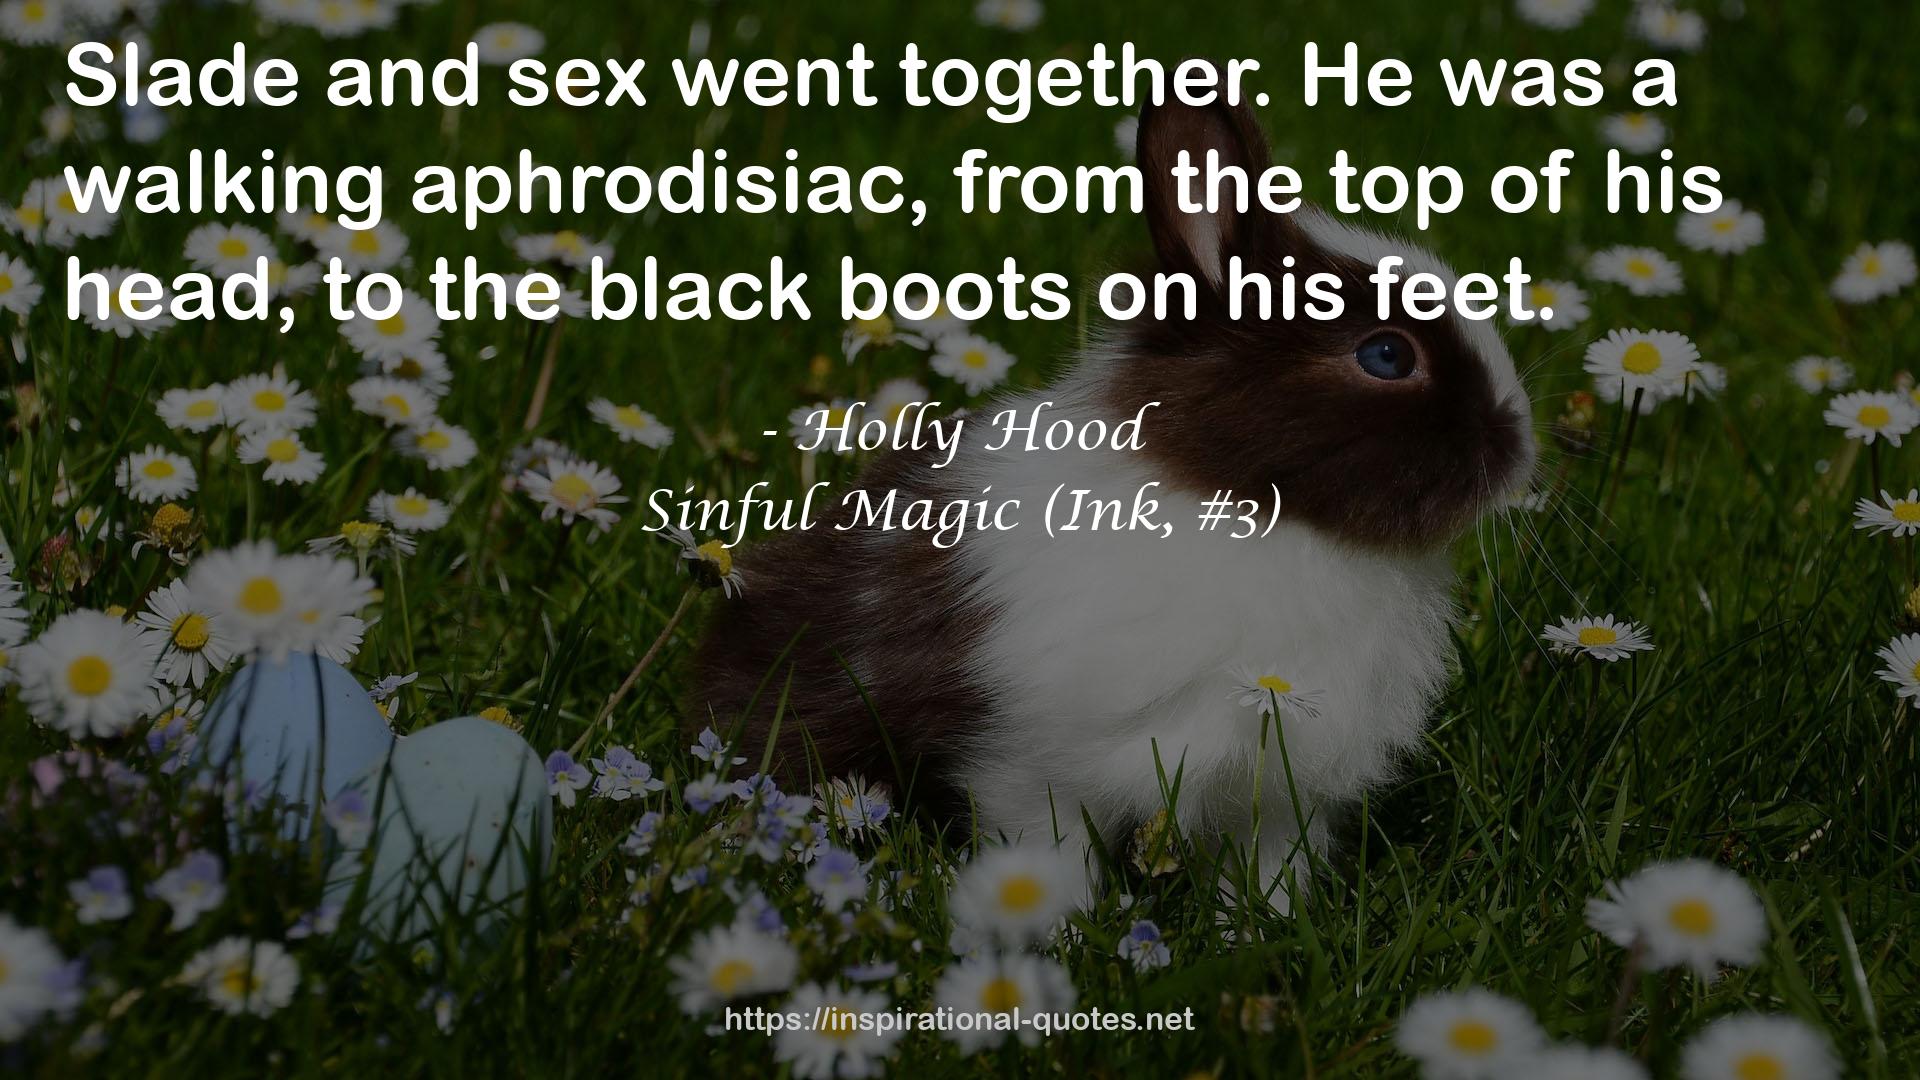 Sinful Magic (Ink, #3) QUOTES